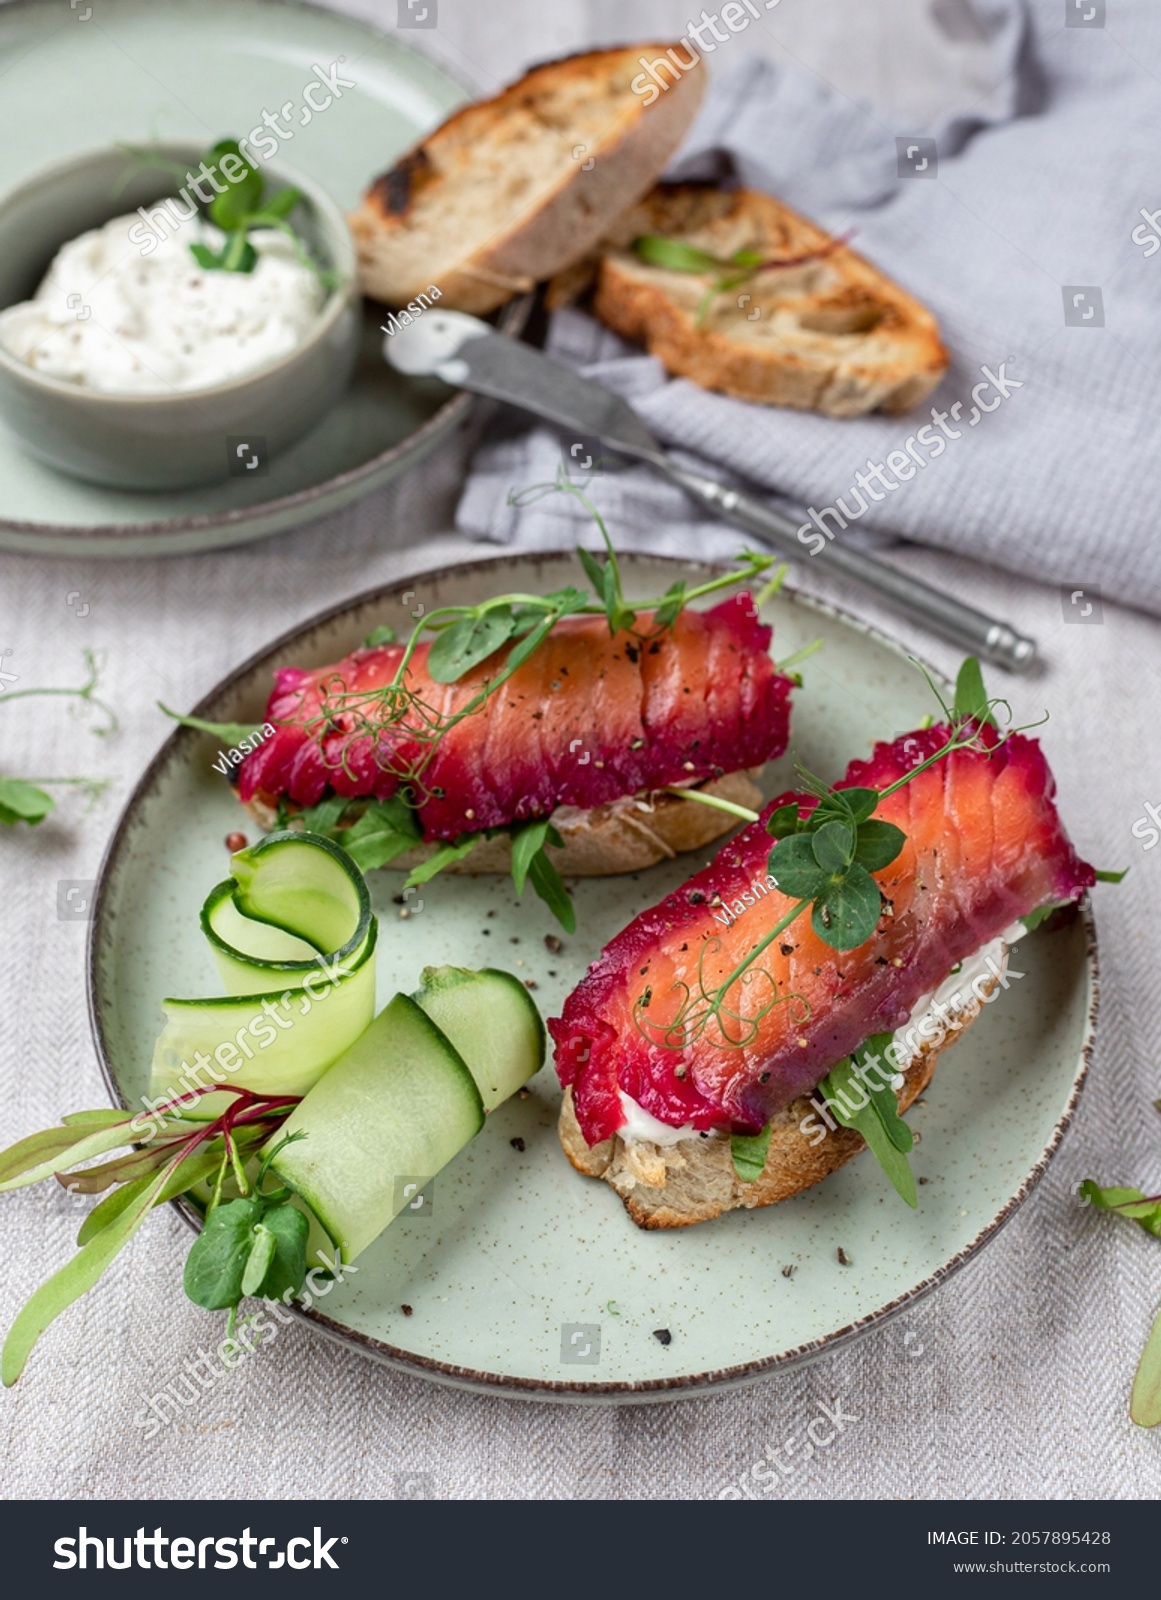 Healthy sandwiches with sourdough crisp bread slices, sour cream, beetroot cured salmon and cucumber on green ceramic plate, top view

A #2057895428